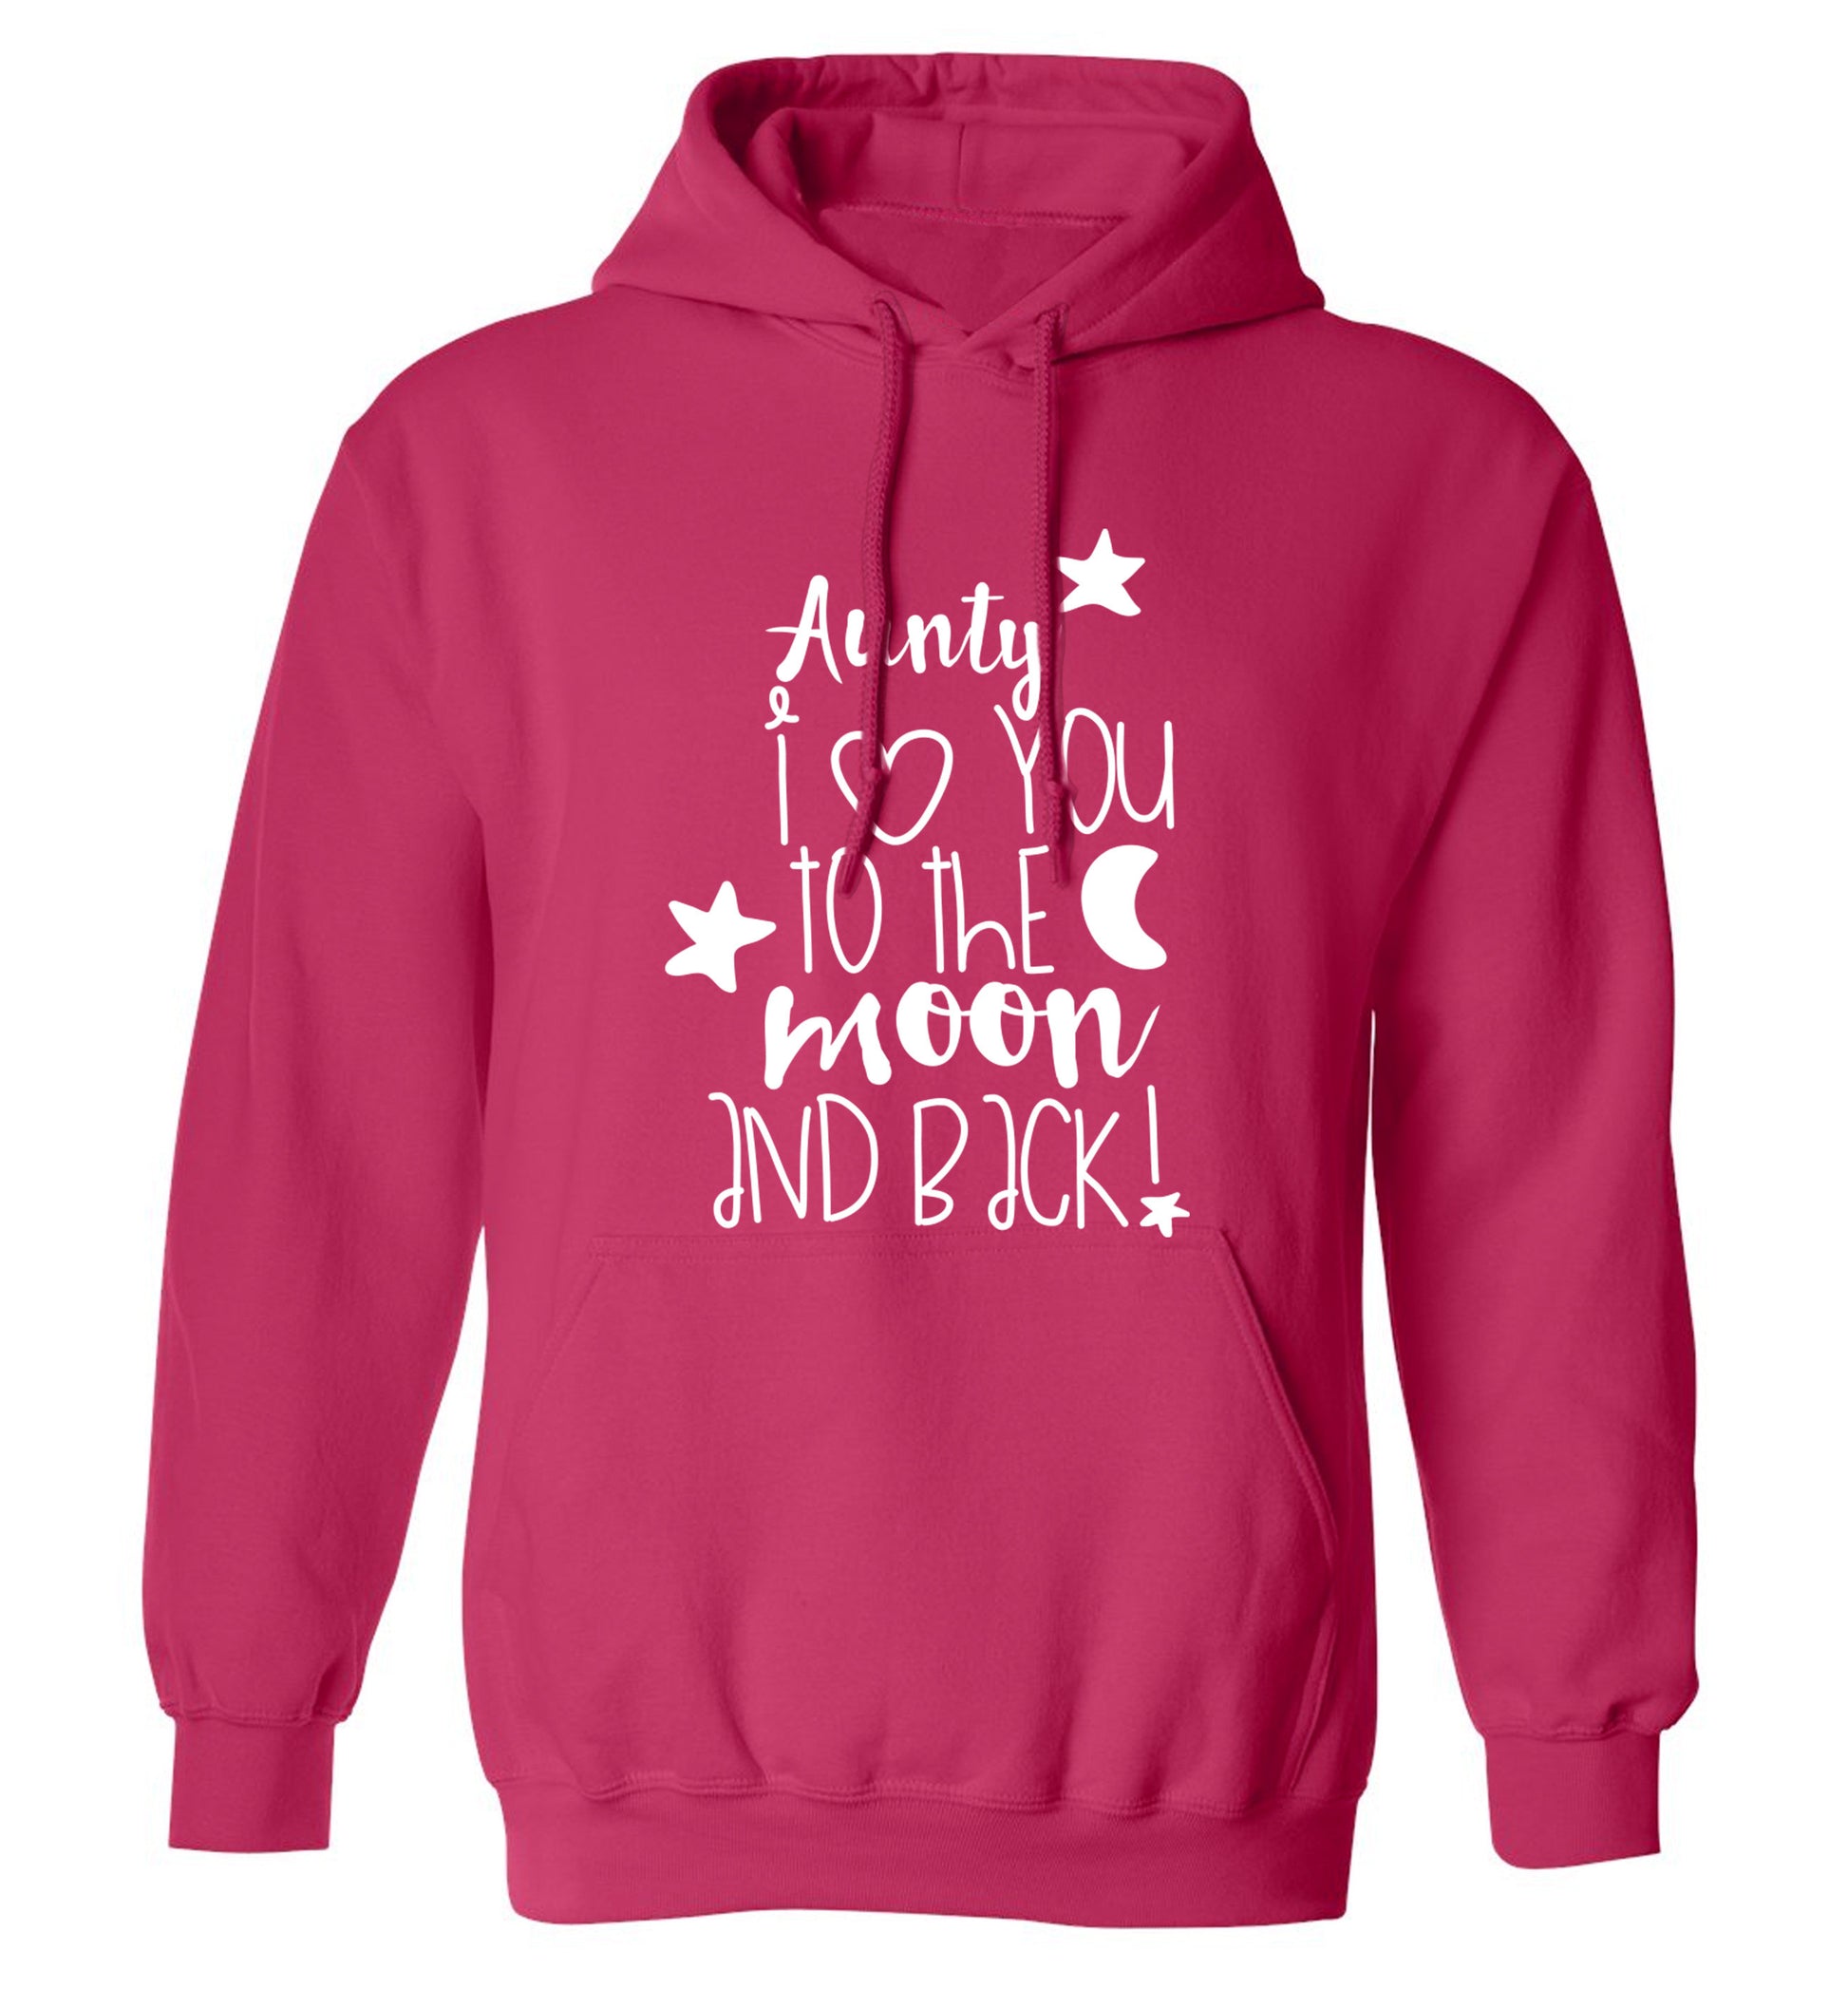 Aunty I love you to the moon and back adults unisex pink hoodie 2XL